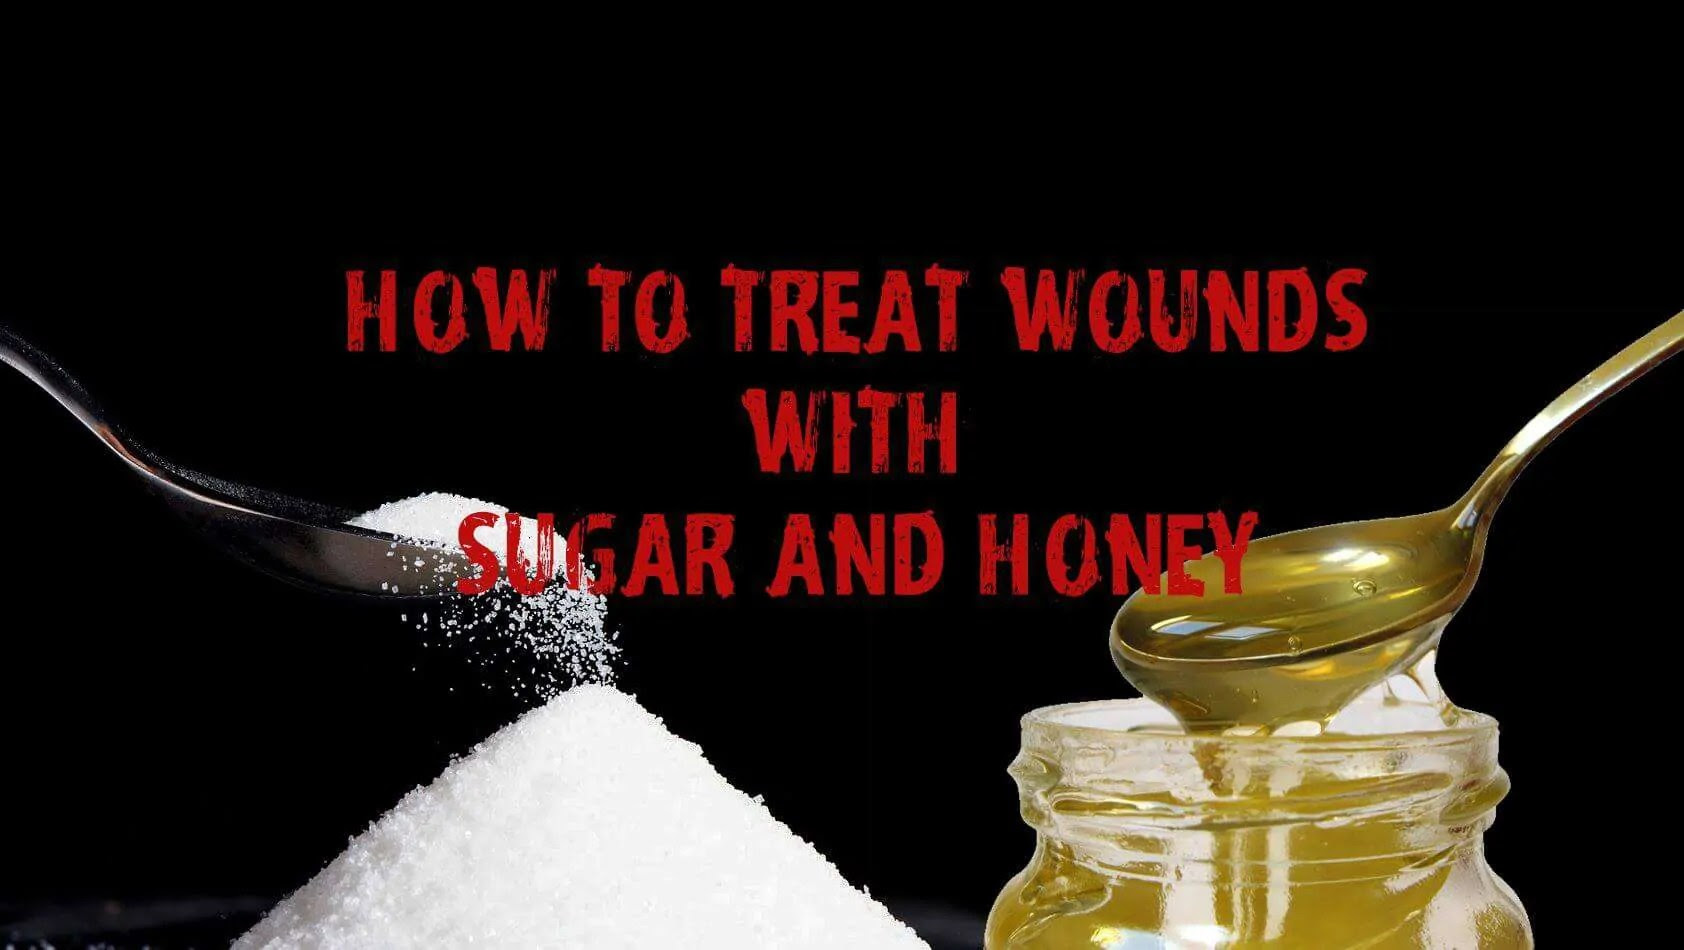 Treating wounds with honey and sugar